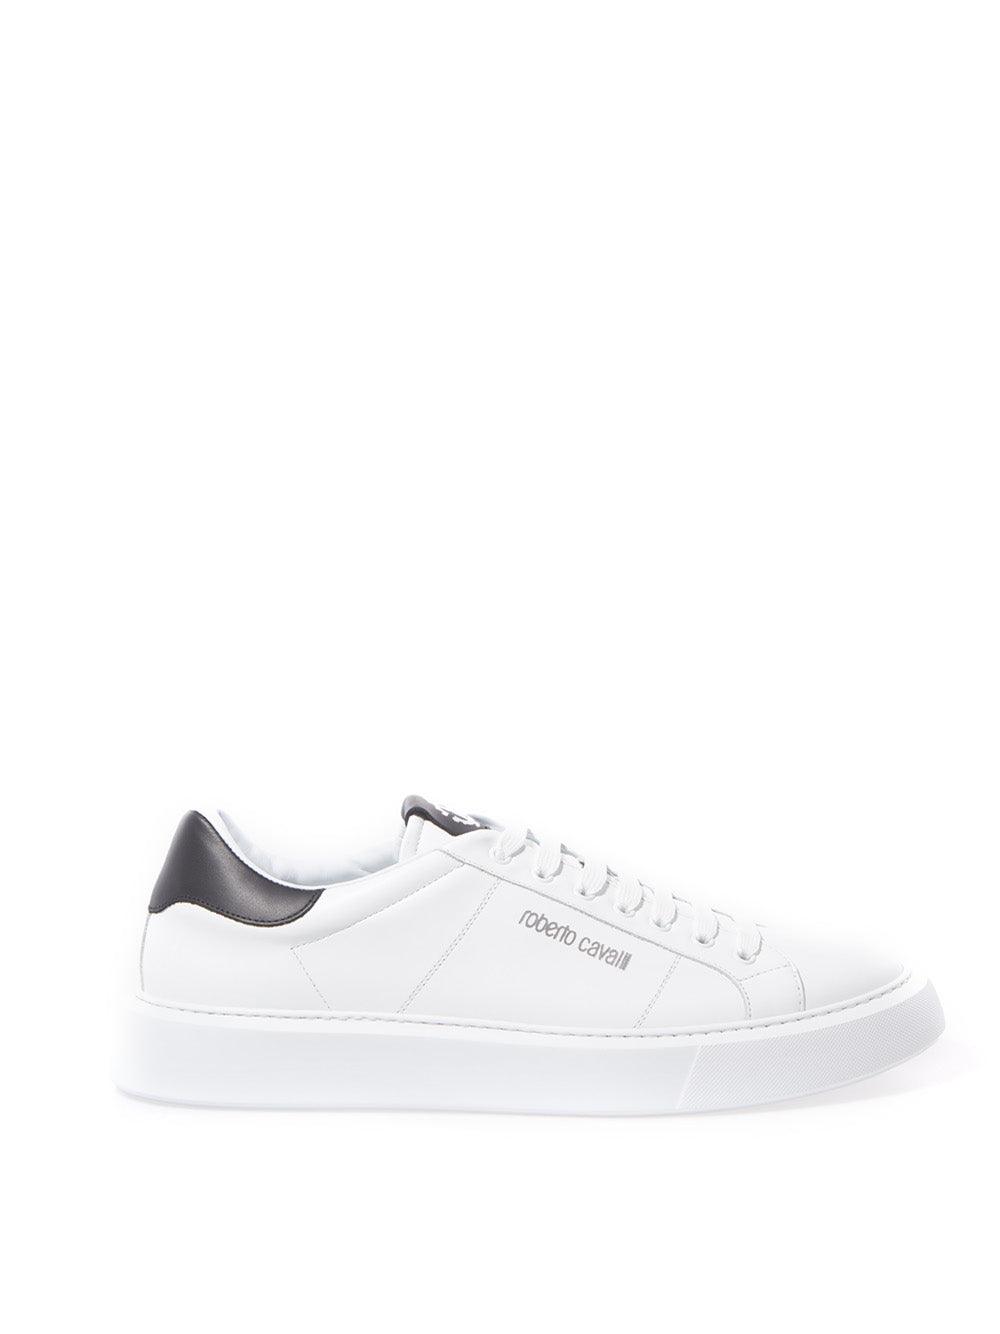 Roberto Cavalli White Leather Sneakers with Silver Logo - Ellie Belle